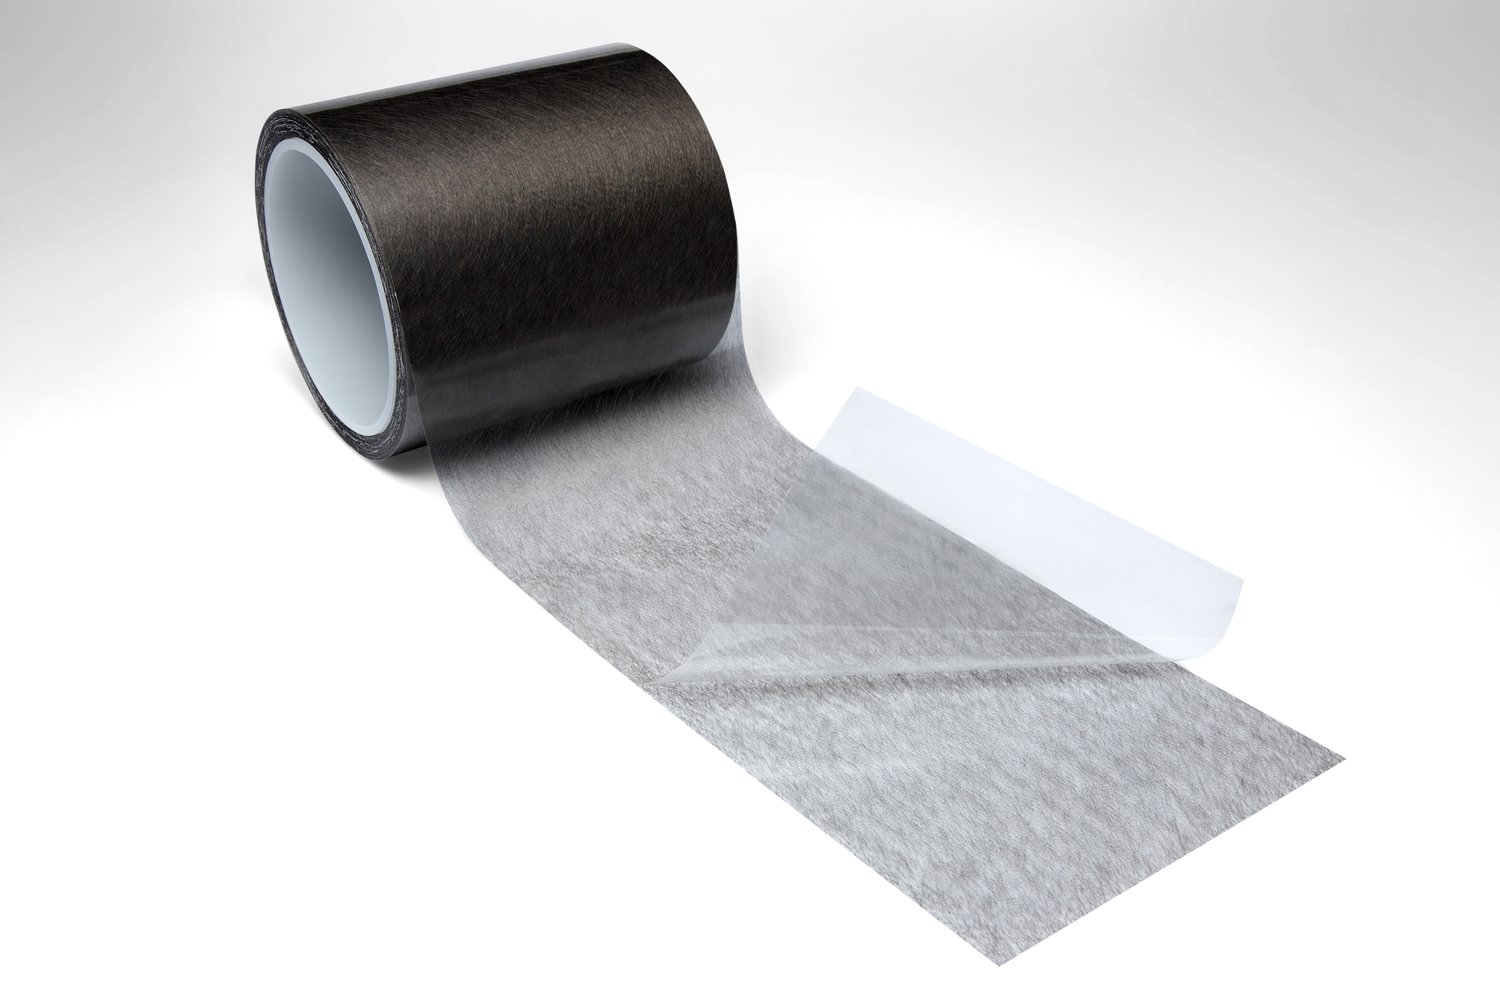 7010409749 - 3M Electrically Conductive Adhesive Transfer Tape 9719, 14 in x 36 yd,
1 Roll/Case